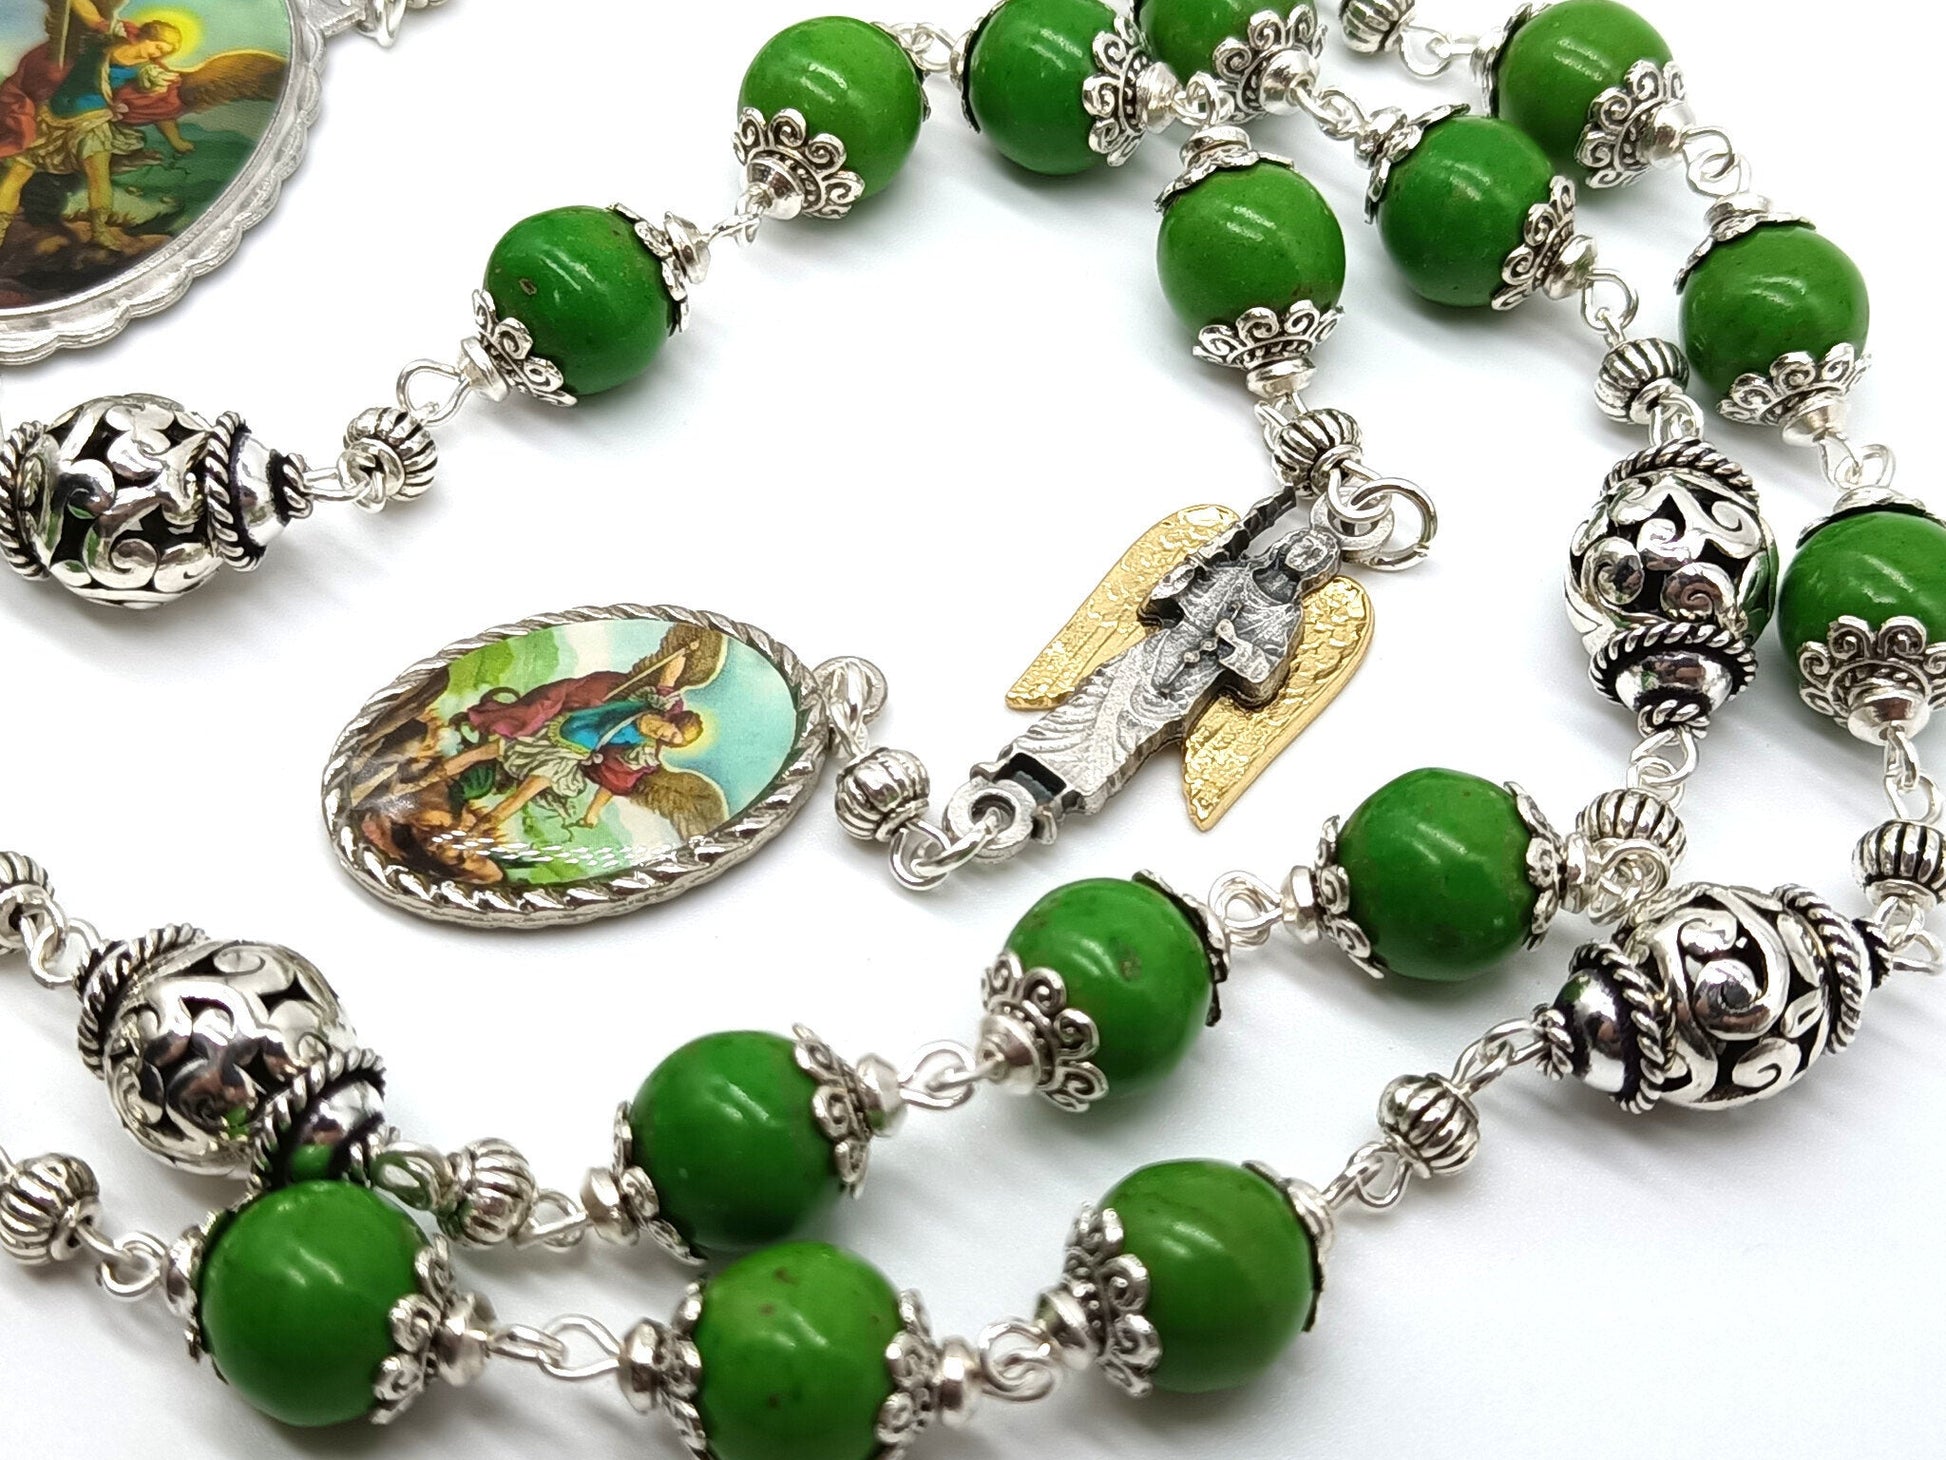 Saint Michael unique rosary beads prayer chaplet with green gemstone beads and silver picture medals, angel medal and silver bead caps.